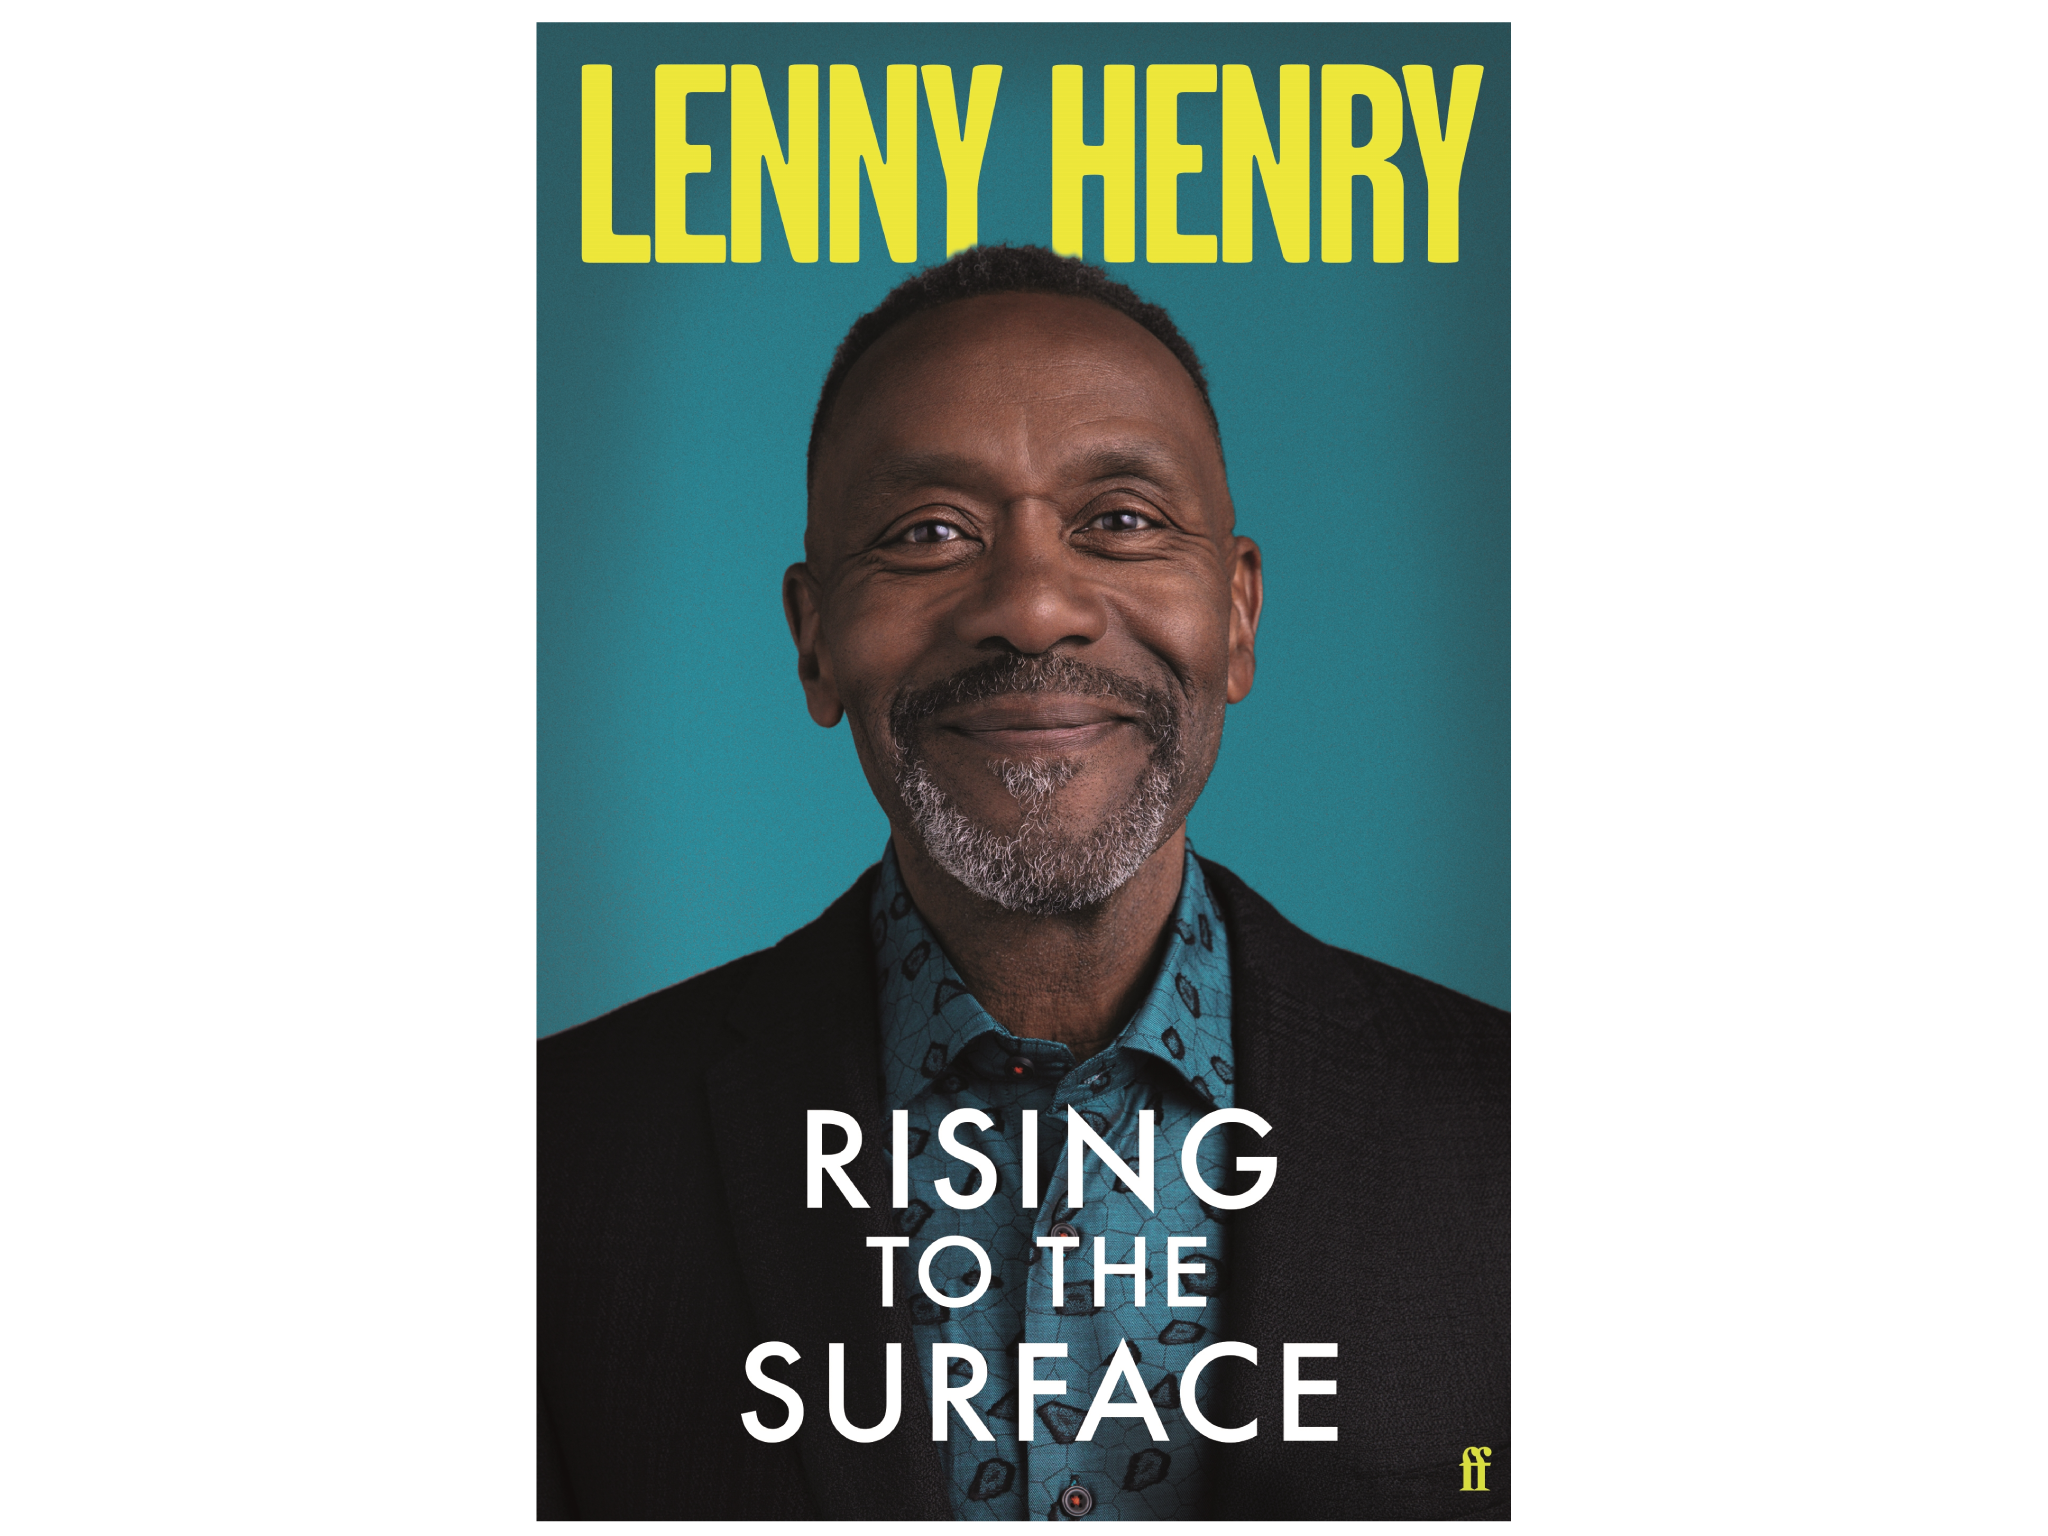 Rising-to-the-Surface -indybest-lenny-henry(1).png